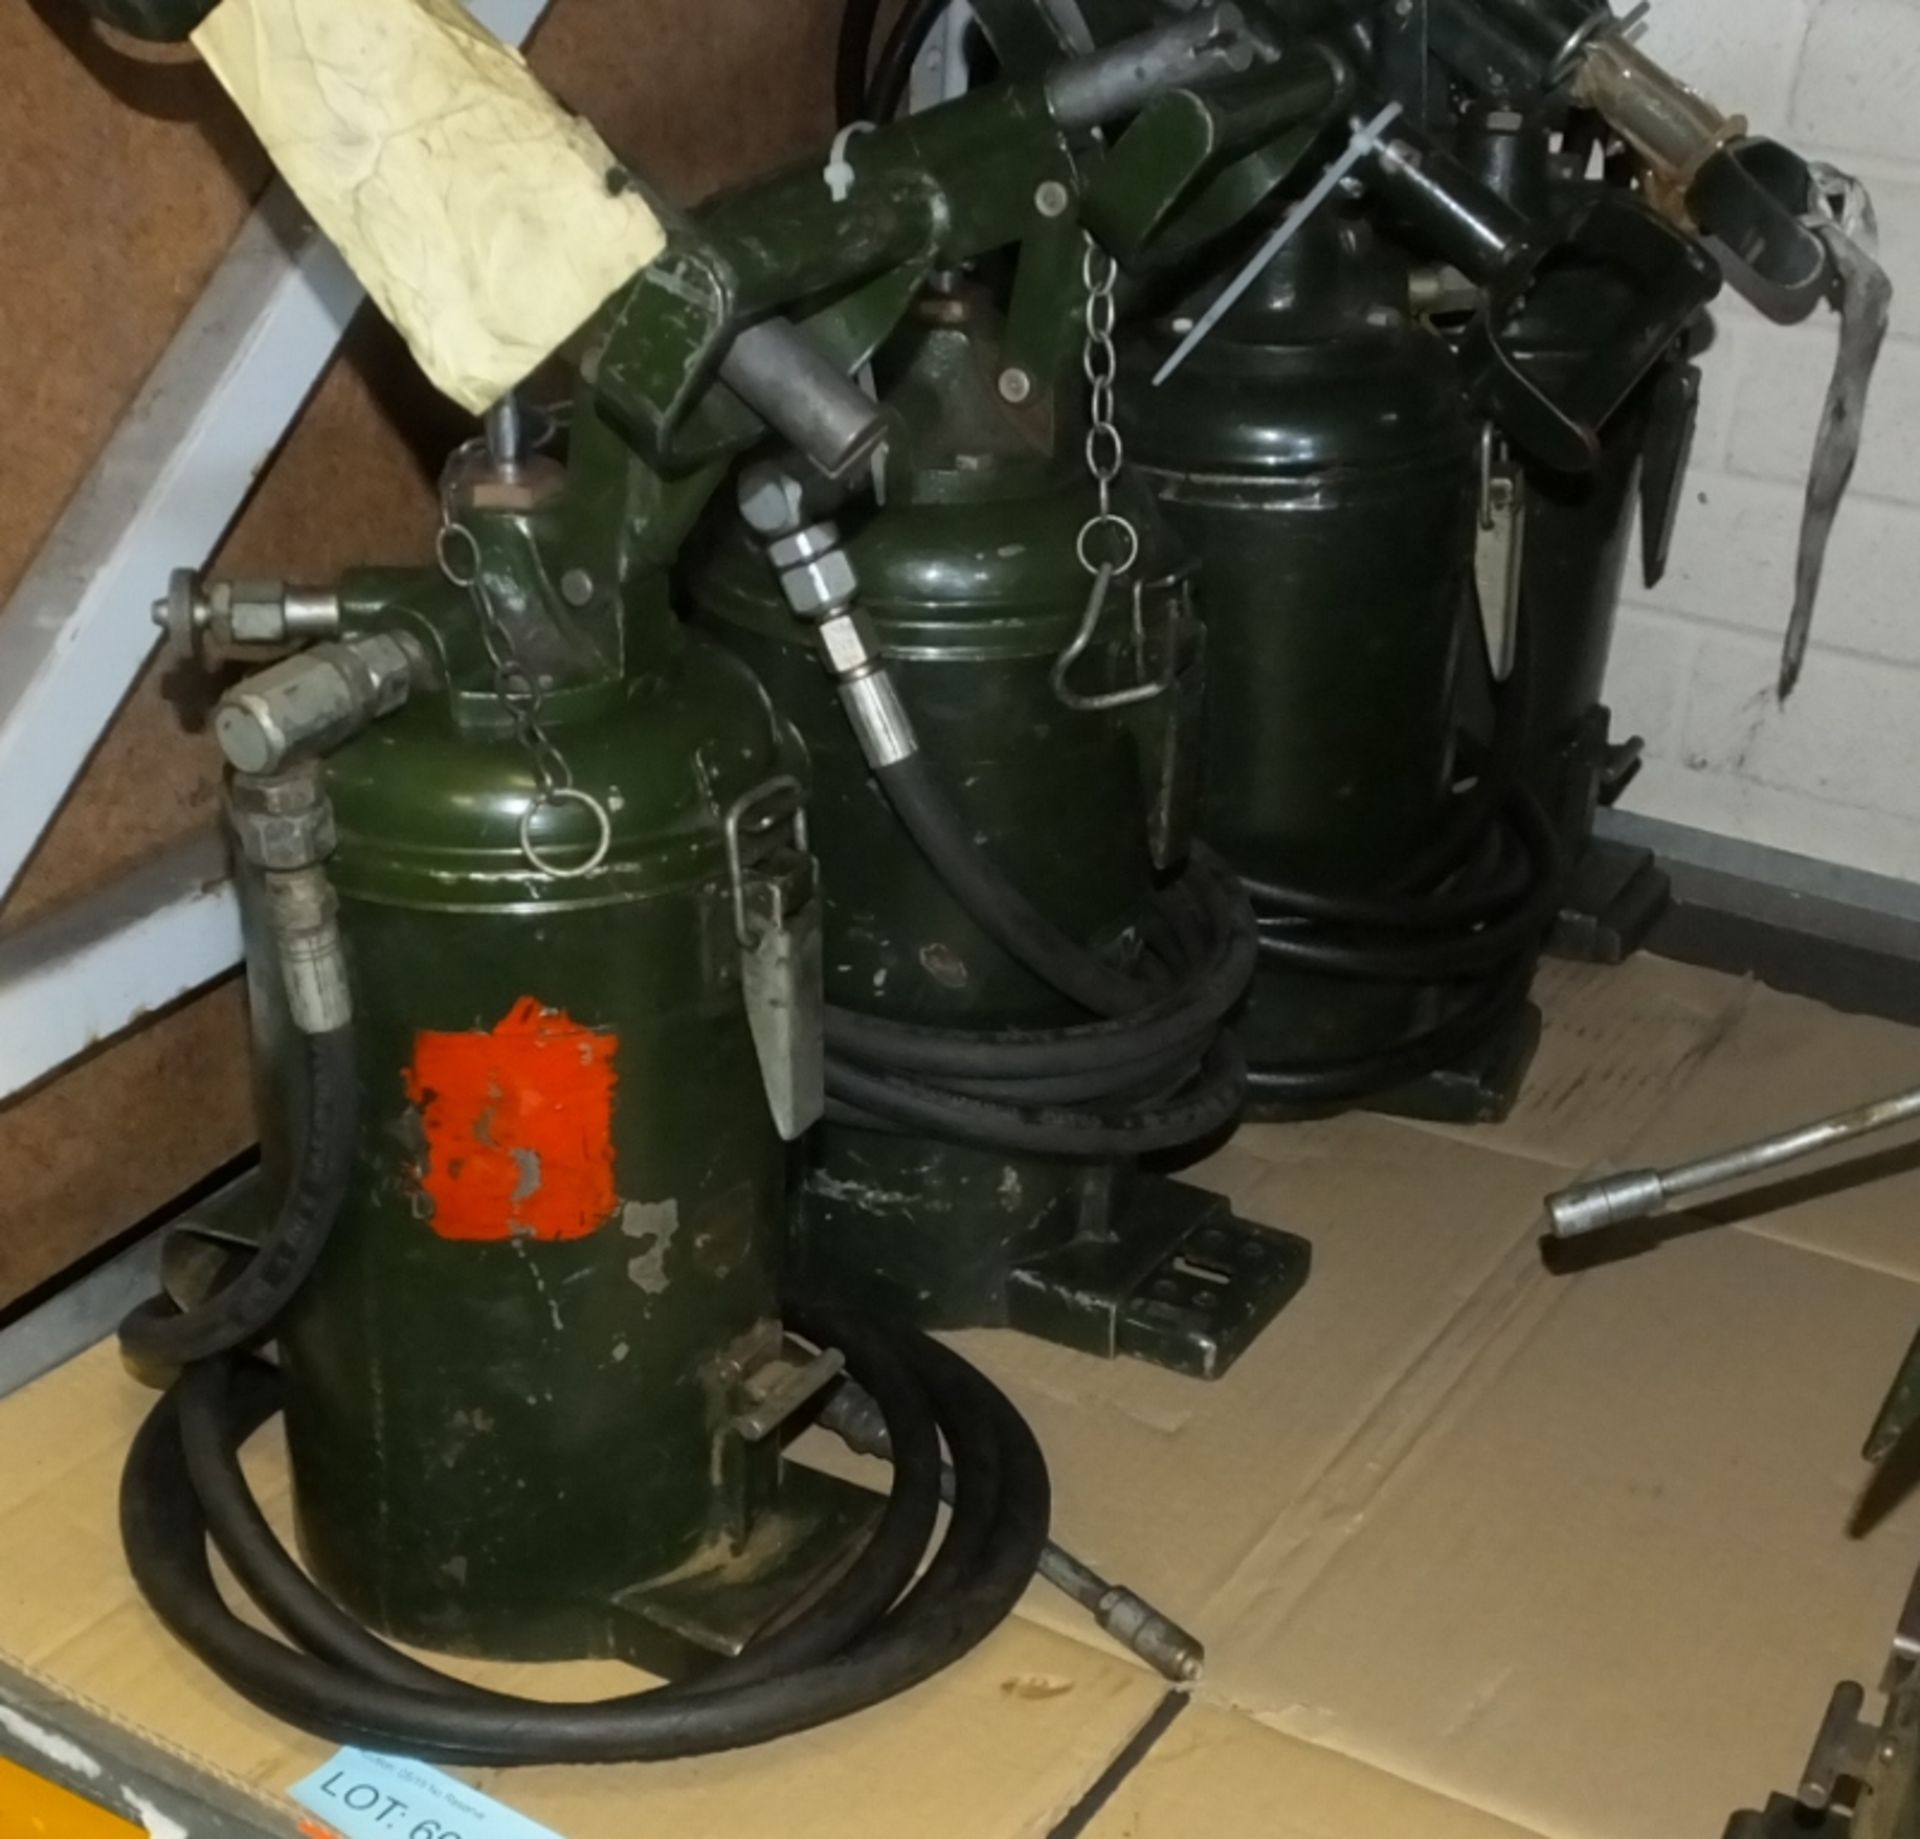 4x Workshop Hand Operrated Lubricating pumps - Image 2 of 2